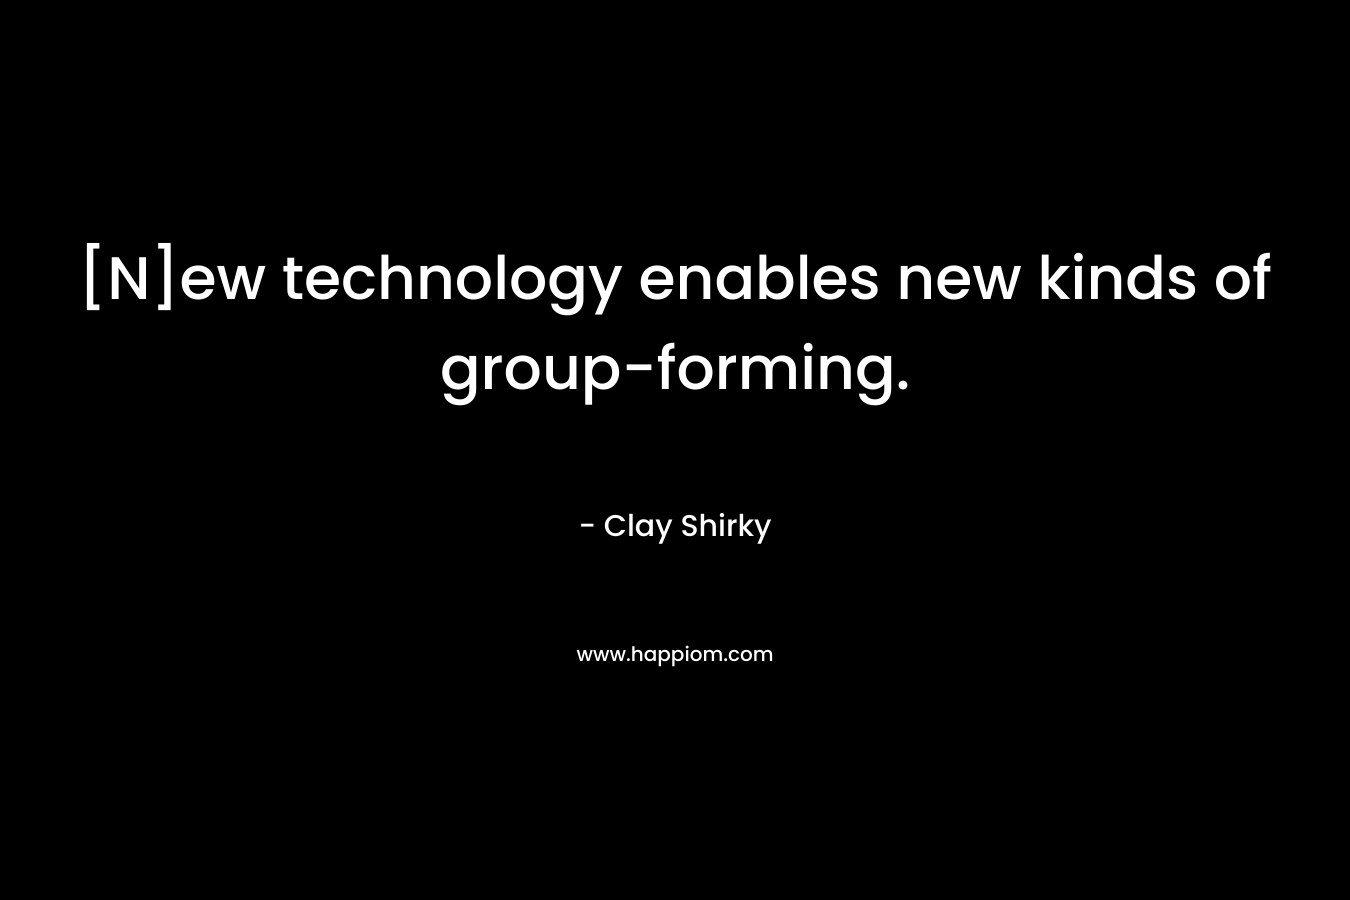 [N]ew technology enables new kinds of group-forming.